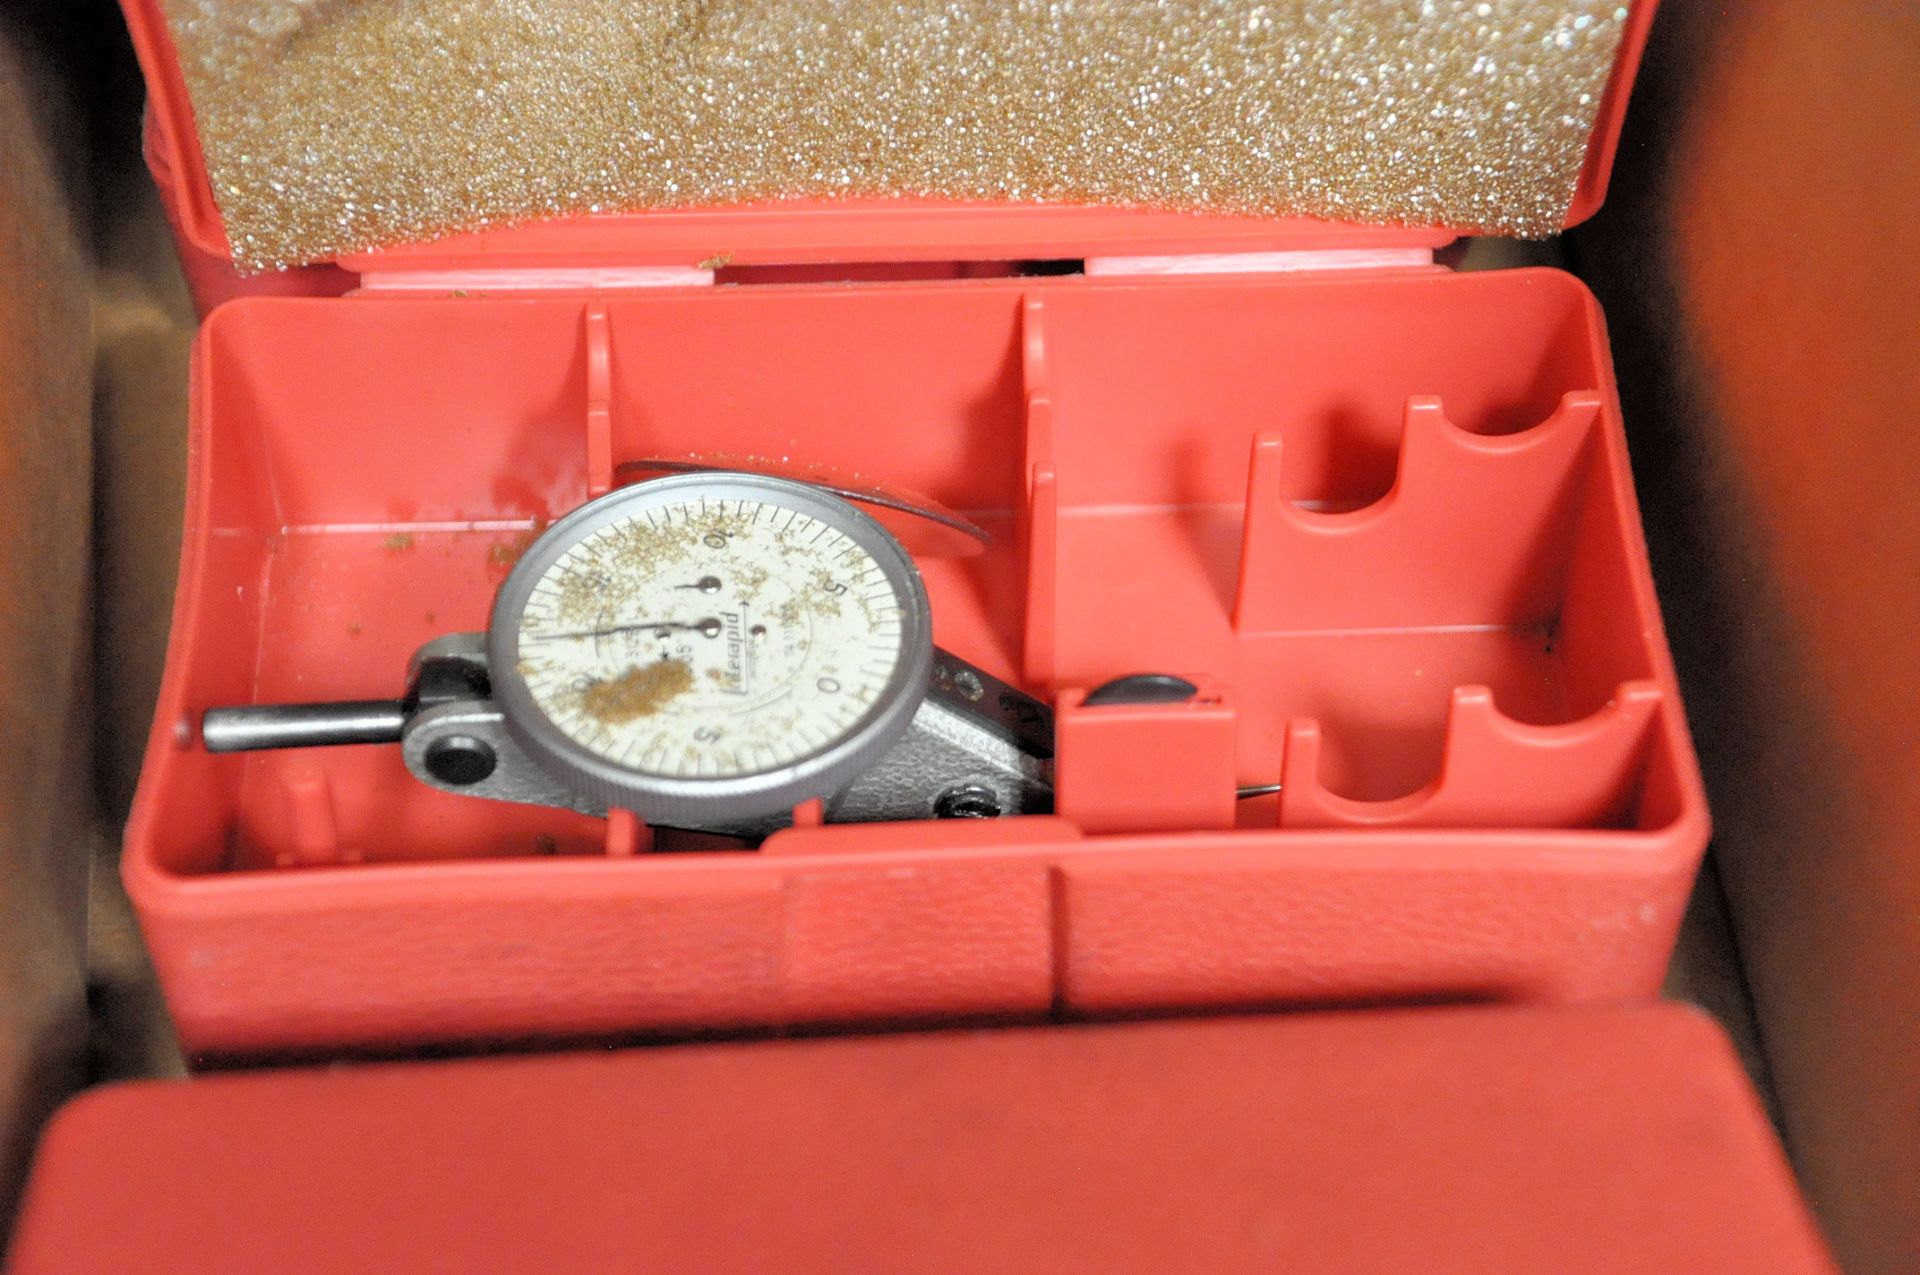 Lot-(3) Various Dial Force Indicator Gauges in (1) Box - Image 3 of 4